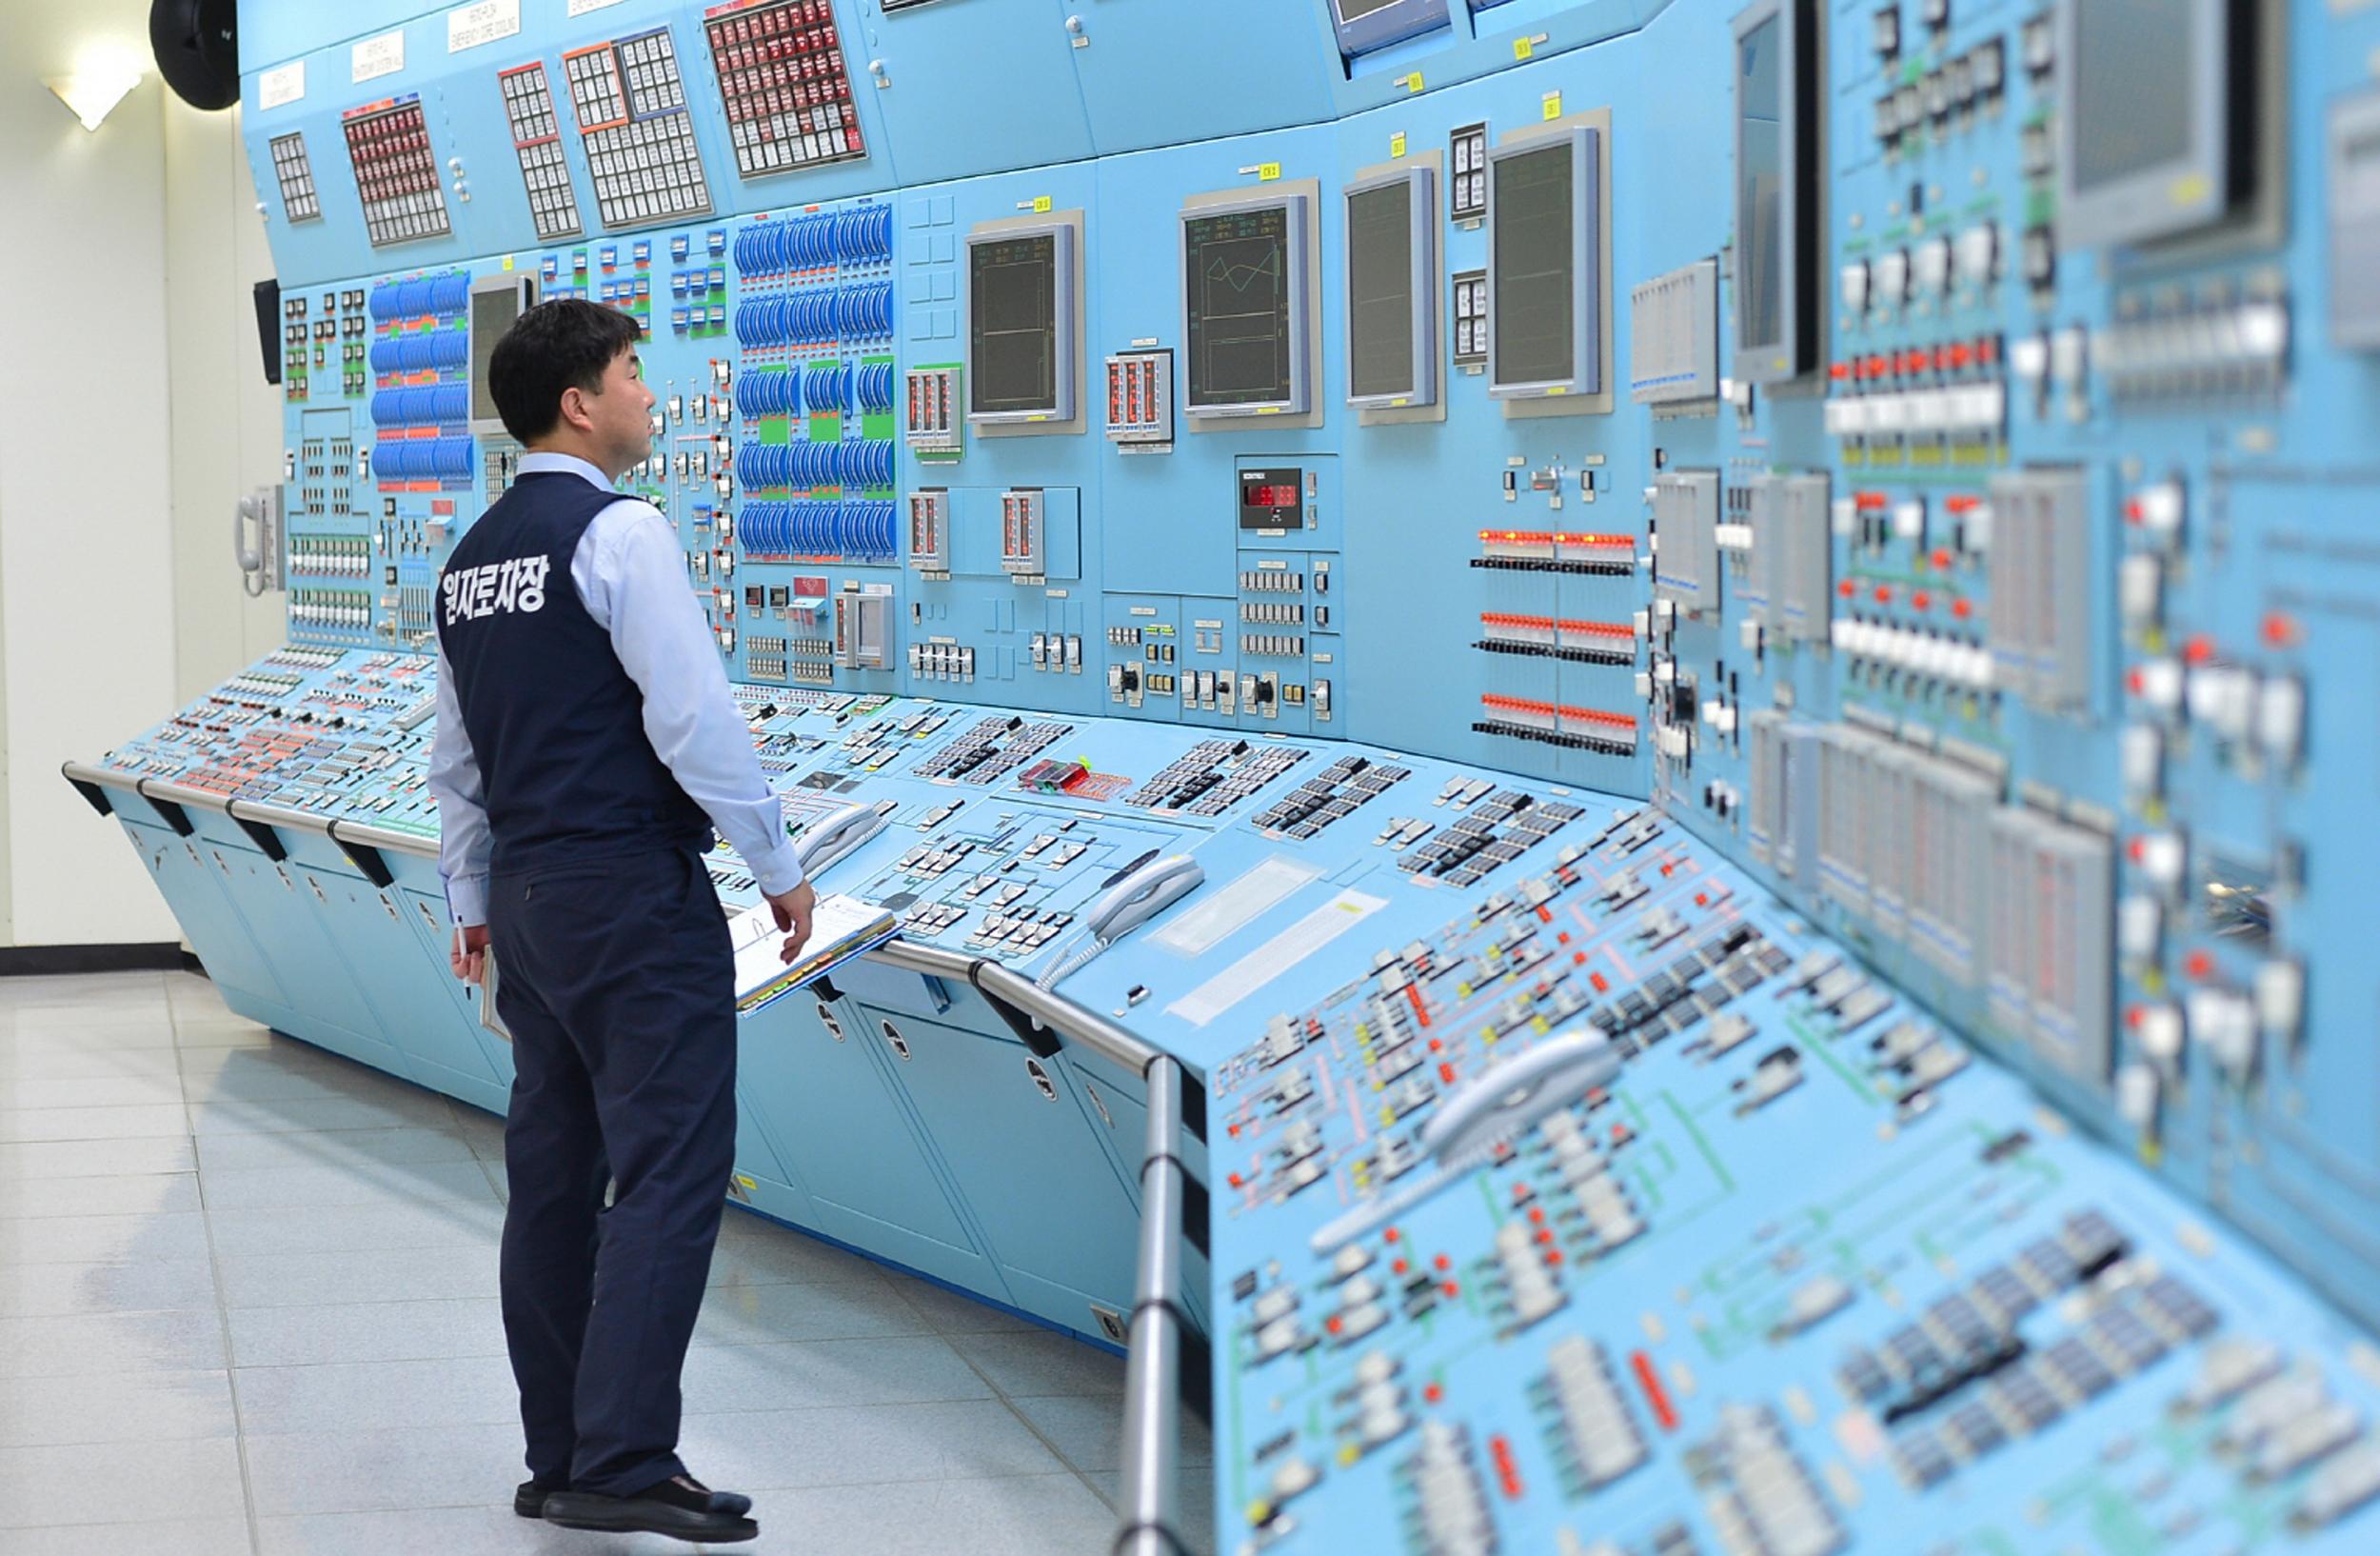 A South Korean worker takes part in an anti cyber attack exercise at Wolsong power plant on December 22, 2014 in Gyeongju, South Korea.